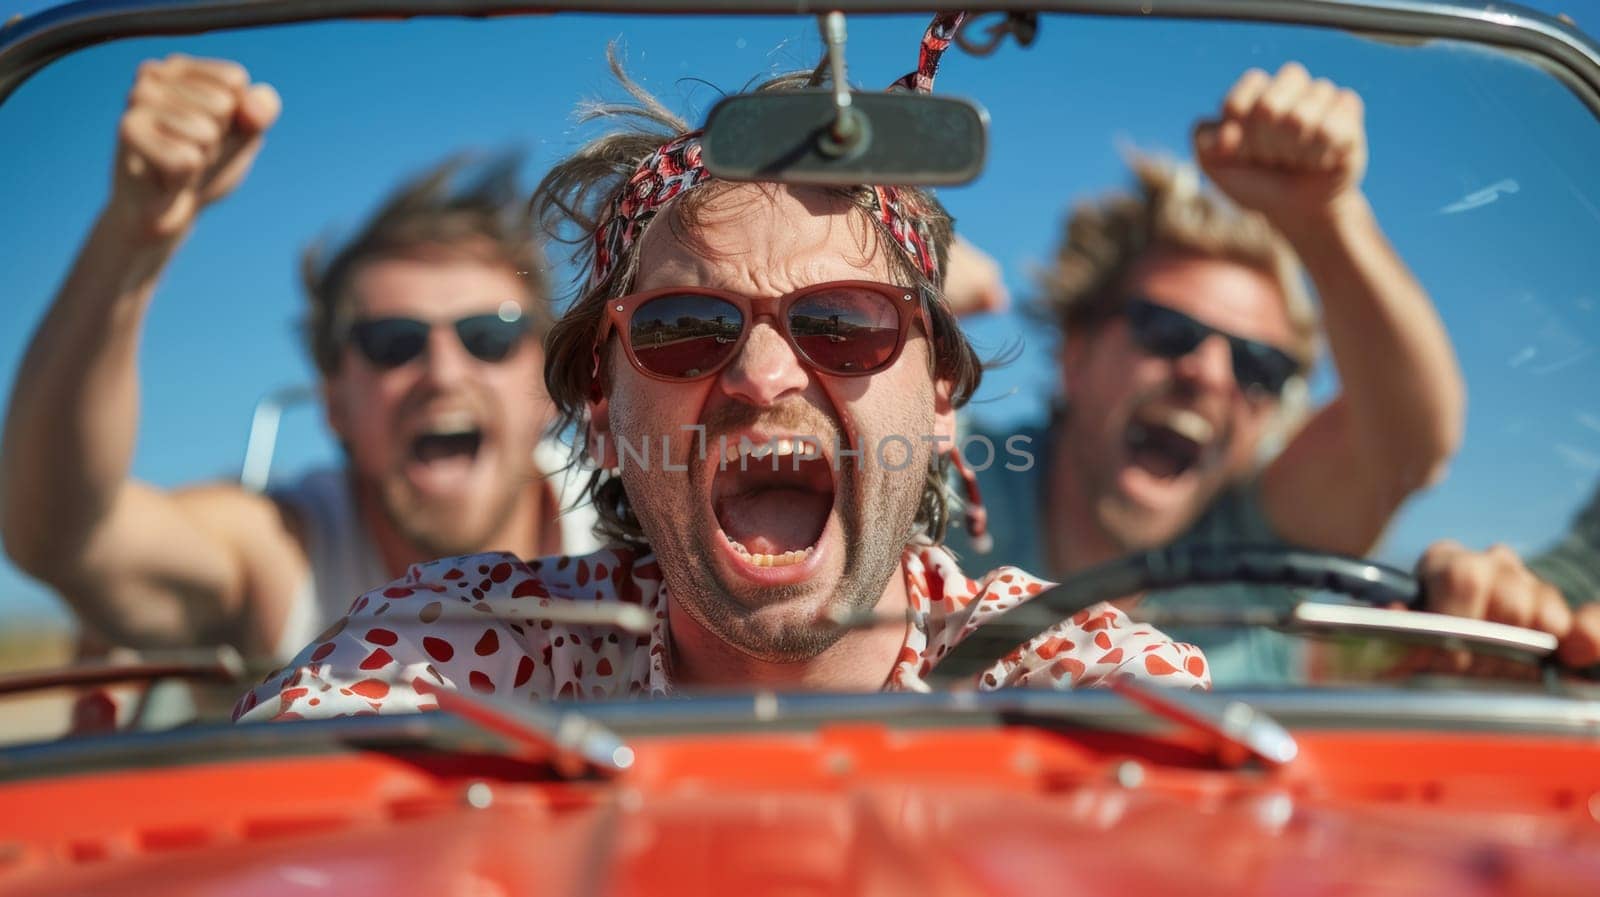 A group of three men in sunglasses are driving a car